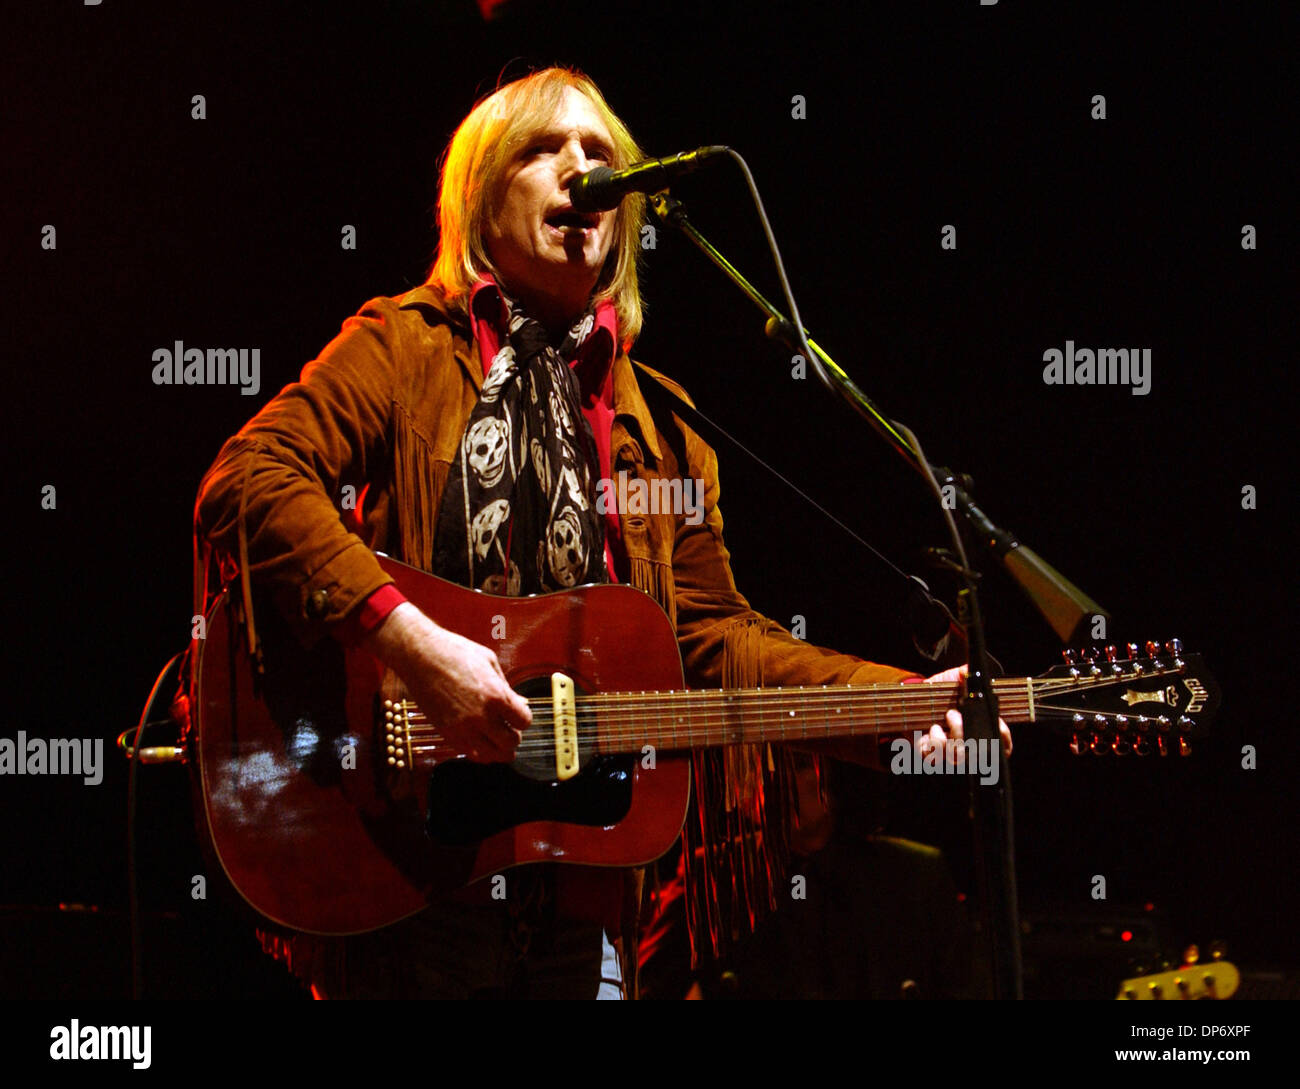 Oct 28, 2006; Las Vegas, NV, USA; Legendary Musicians TOM PETTY and the Heartbreakers perform live at the 2nd annual Vegoose Music Festival at Sam Boyd Stadium. Mandatory Credit: Photo by Jason Moore/ZUMA Press. (©) Copyright 2006 by Jason Moore Stock Photo